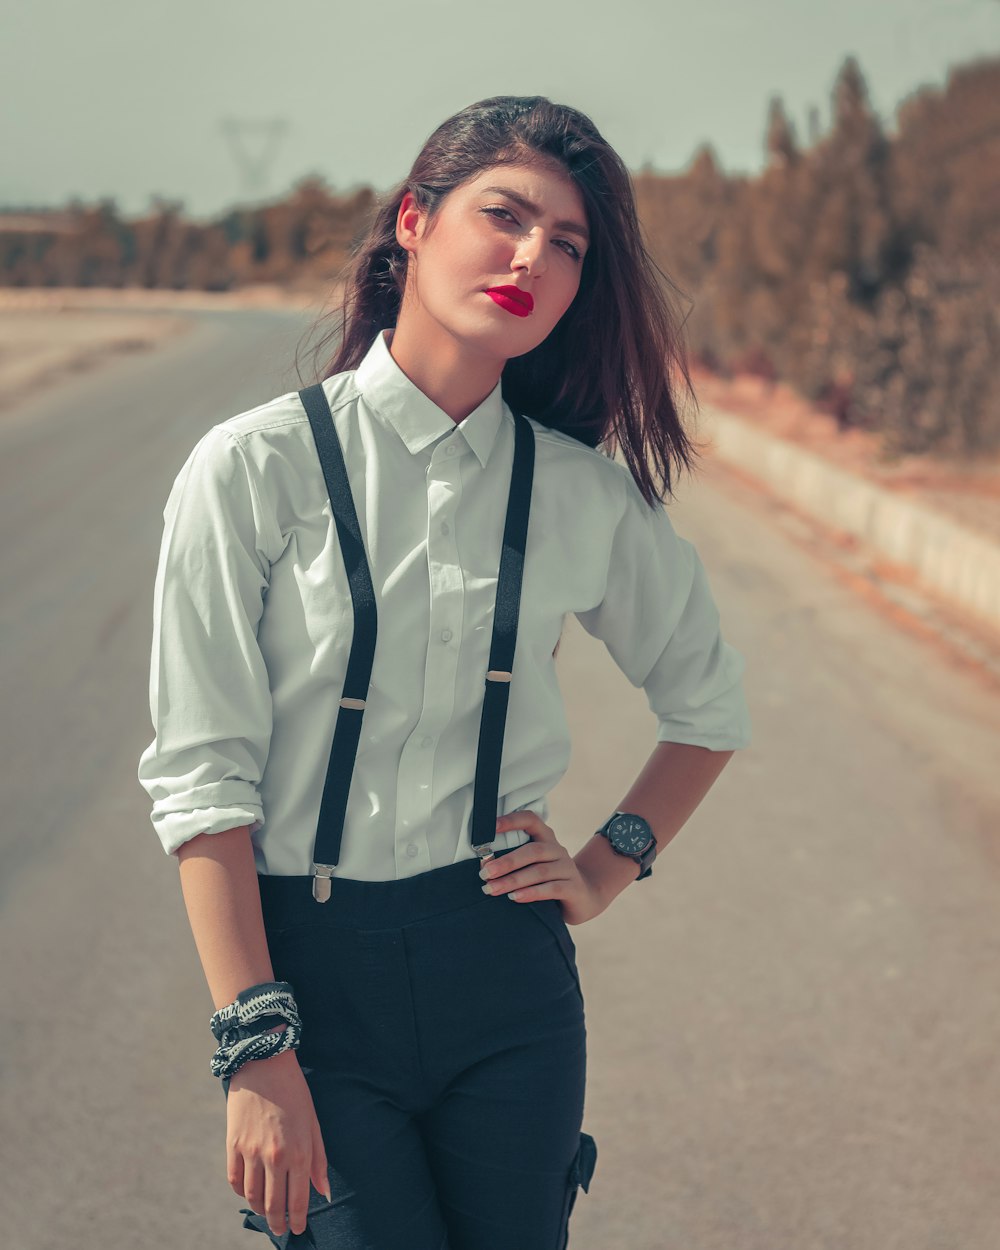 Woman In White Button Up Shirt And Black Pants Standing On Road During  Daytime Photo – Free #Girl Image On Unsplash